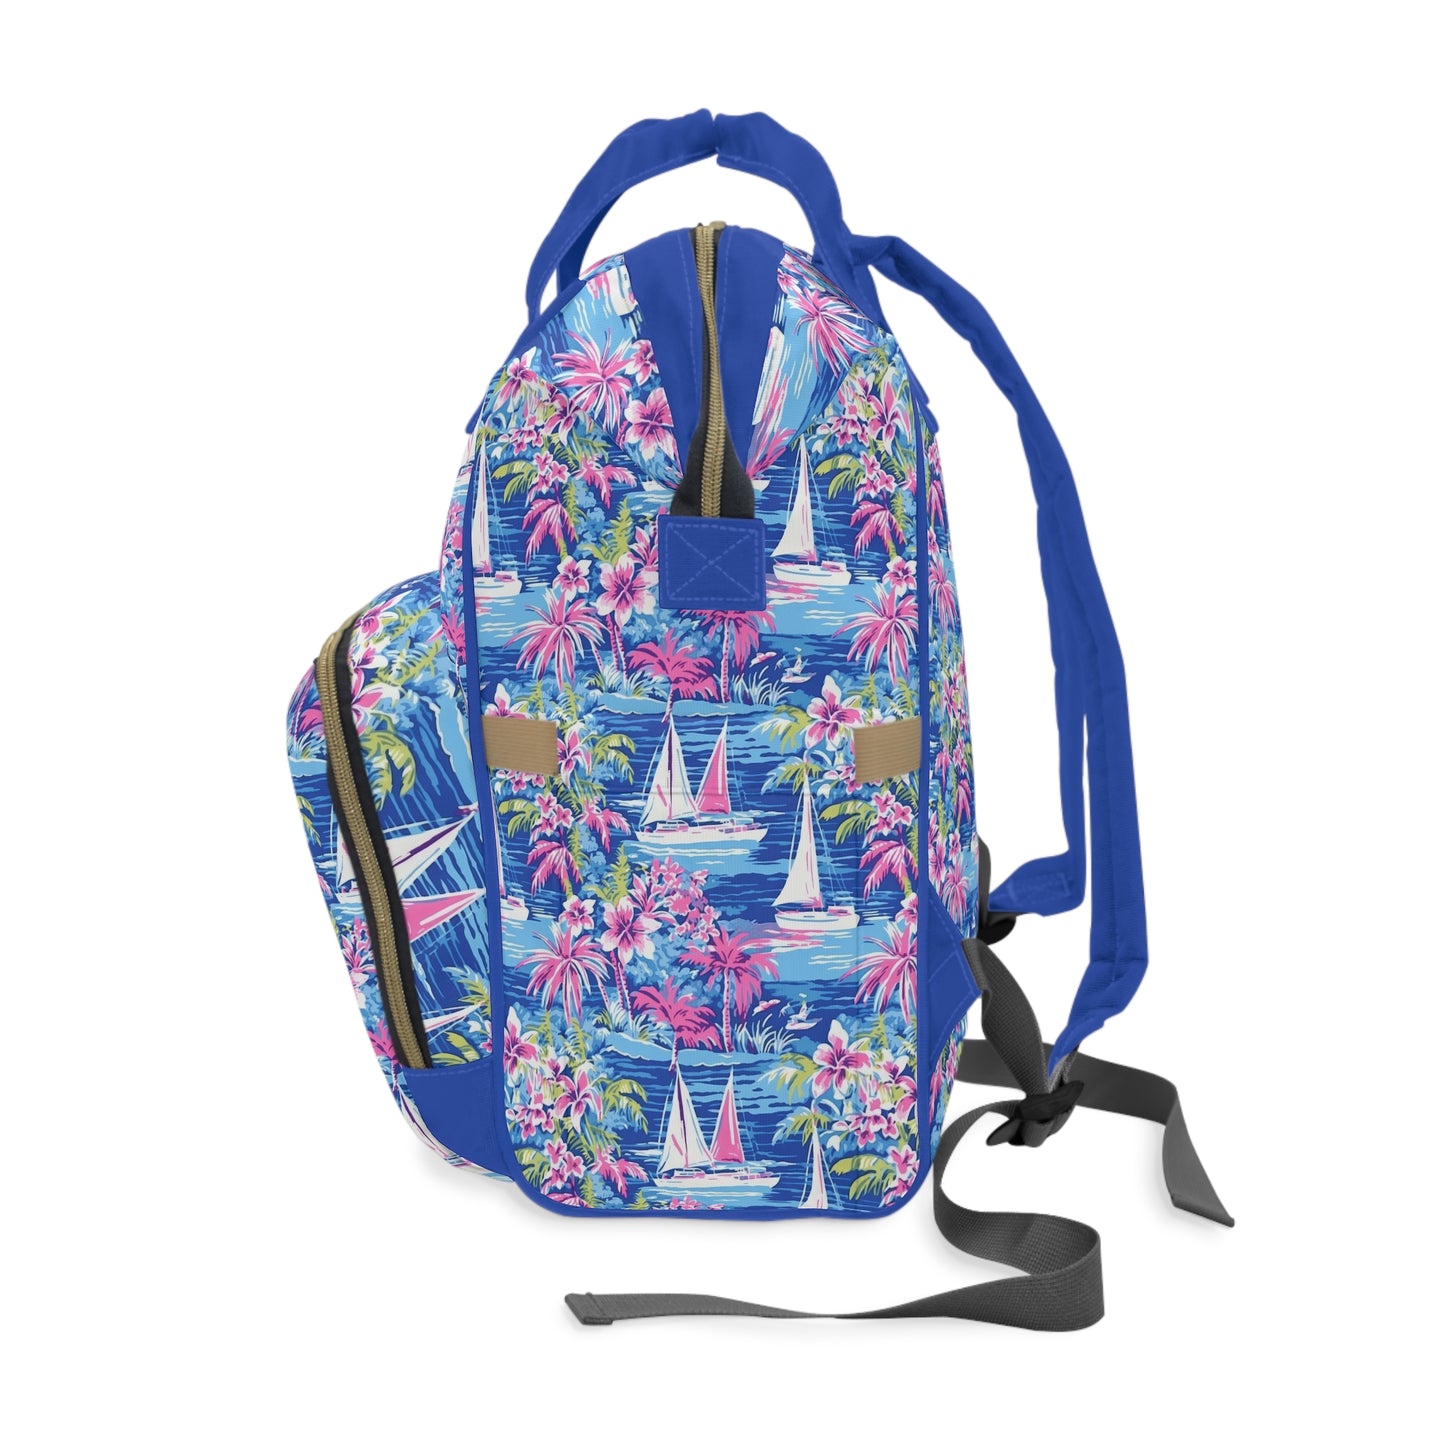 Sailing Tropics: Watercolor Sailboats Amidst Ocean Waves, Tropical Flowers, and Palm Trees Multifunctional Diaper Backpack